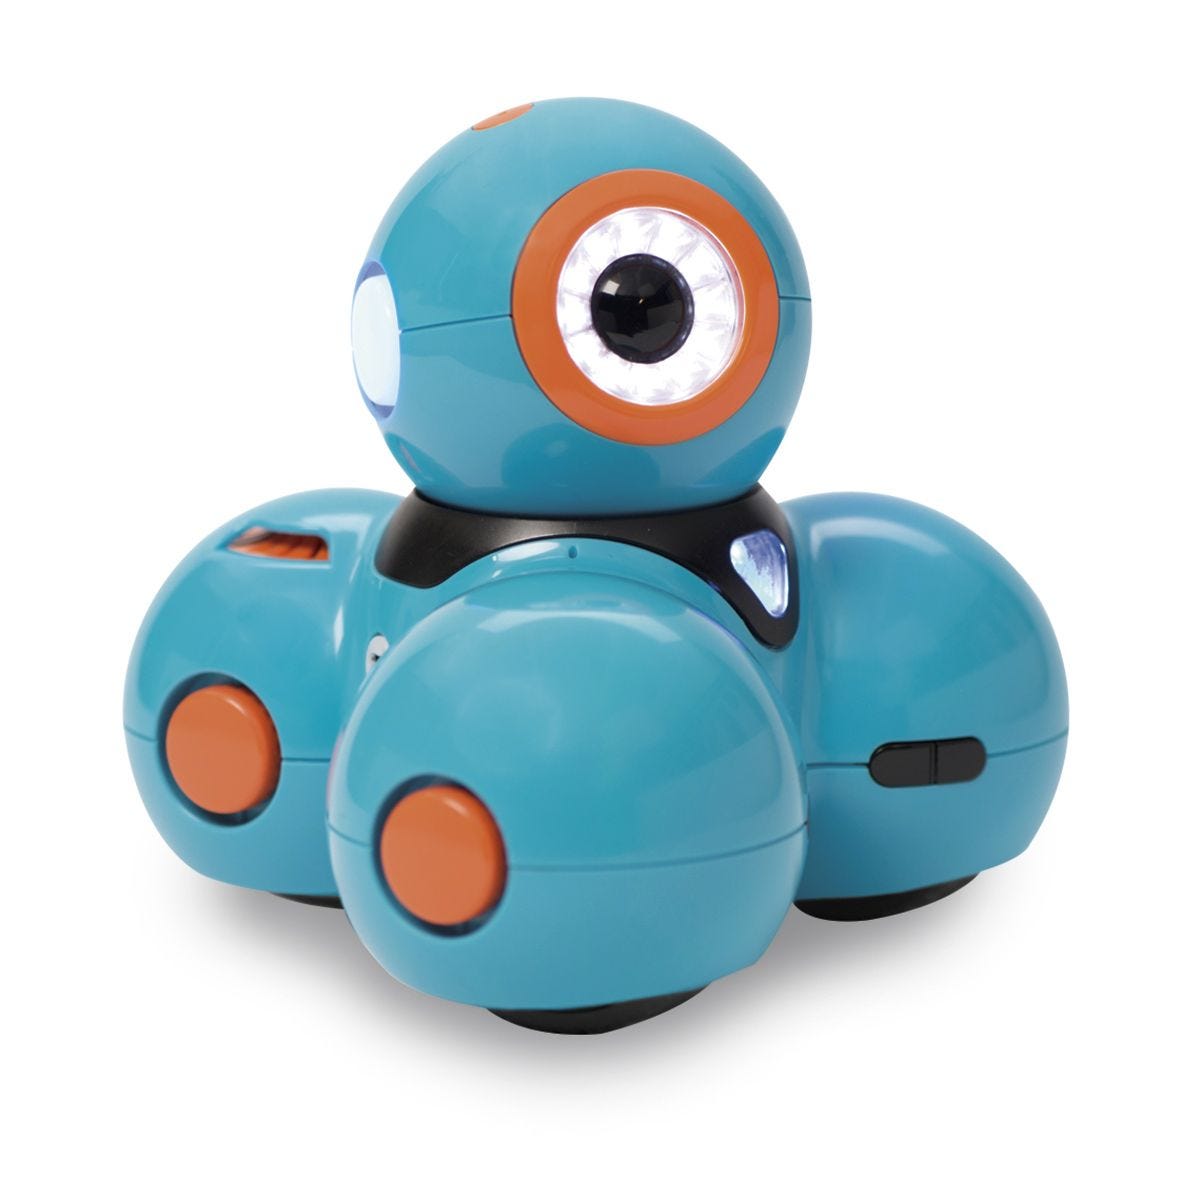 Classroom Activities Using the Dash & Dot Robots - Technology for Learners